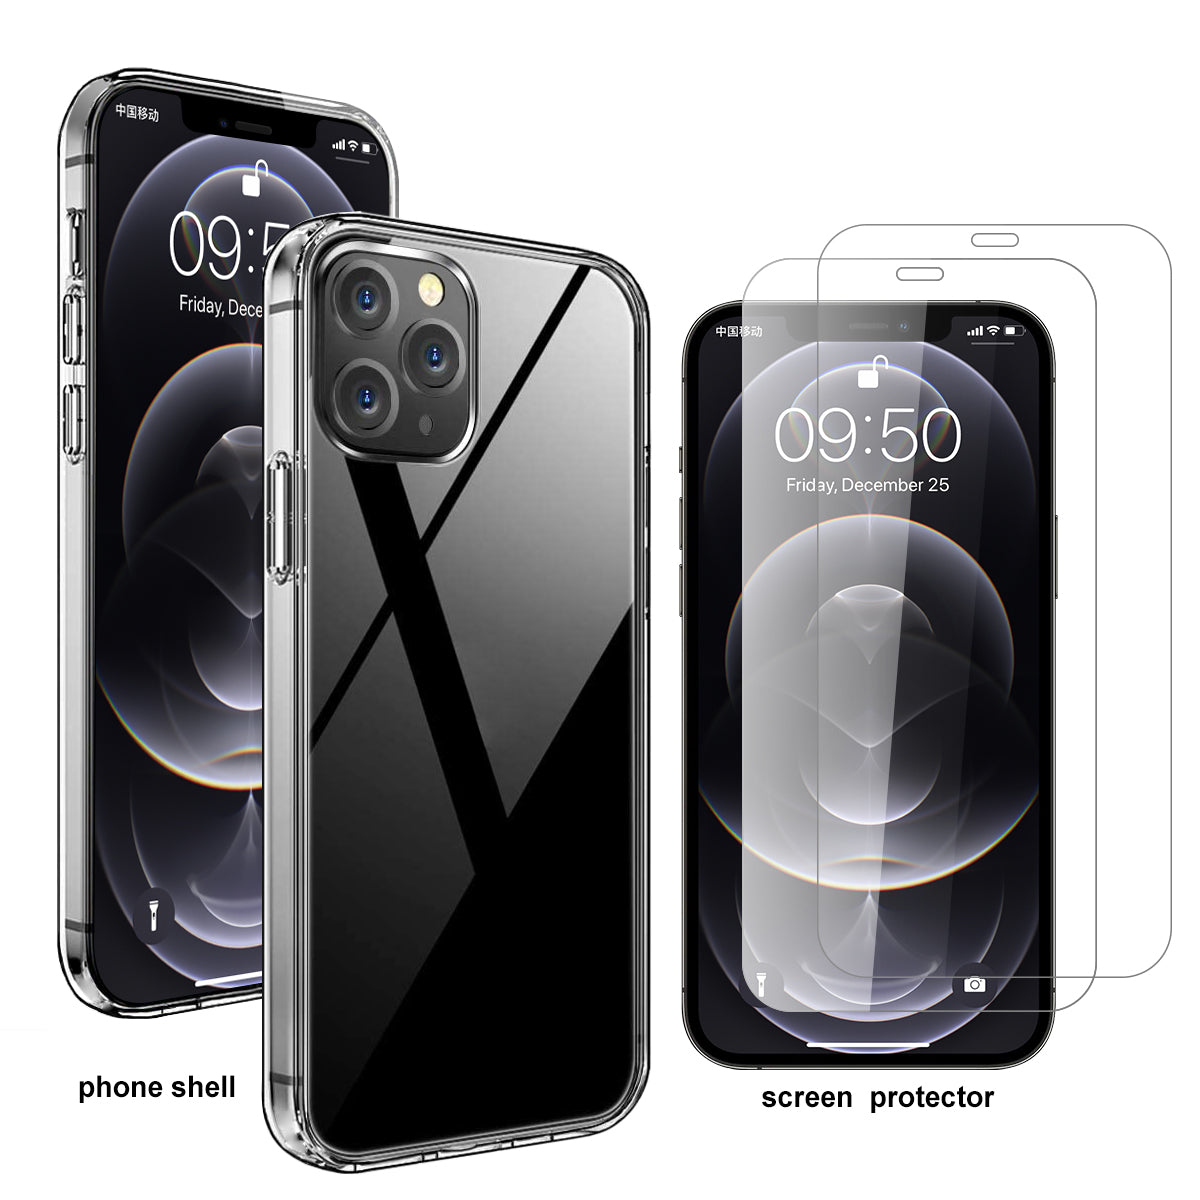 iPhone 12 Pro Max Clear Strong TPU Case and 2 Tempered Glass Screen Protectors